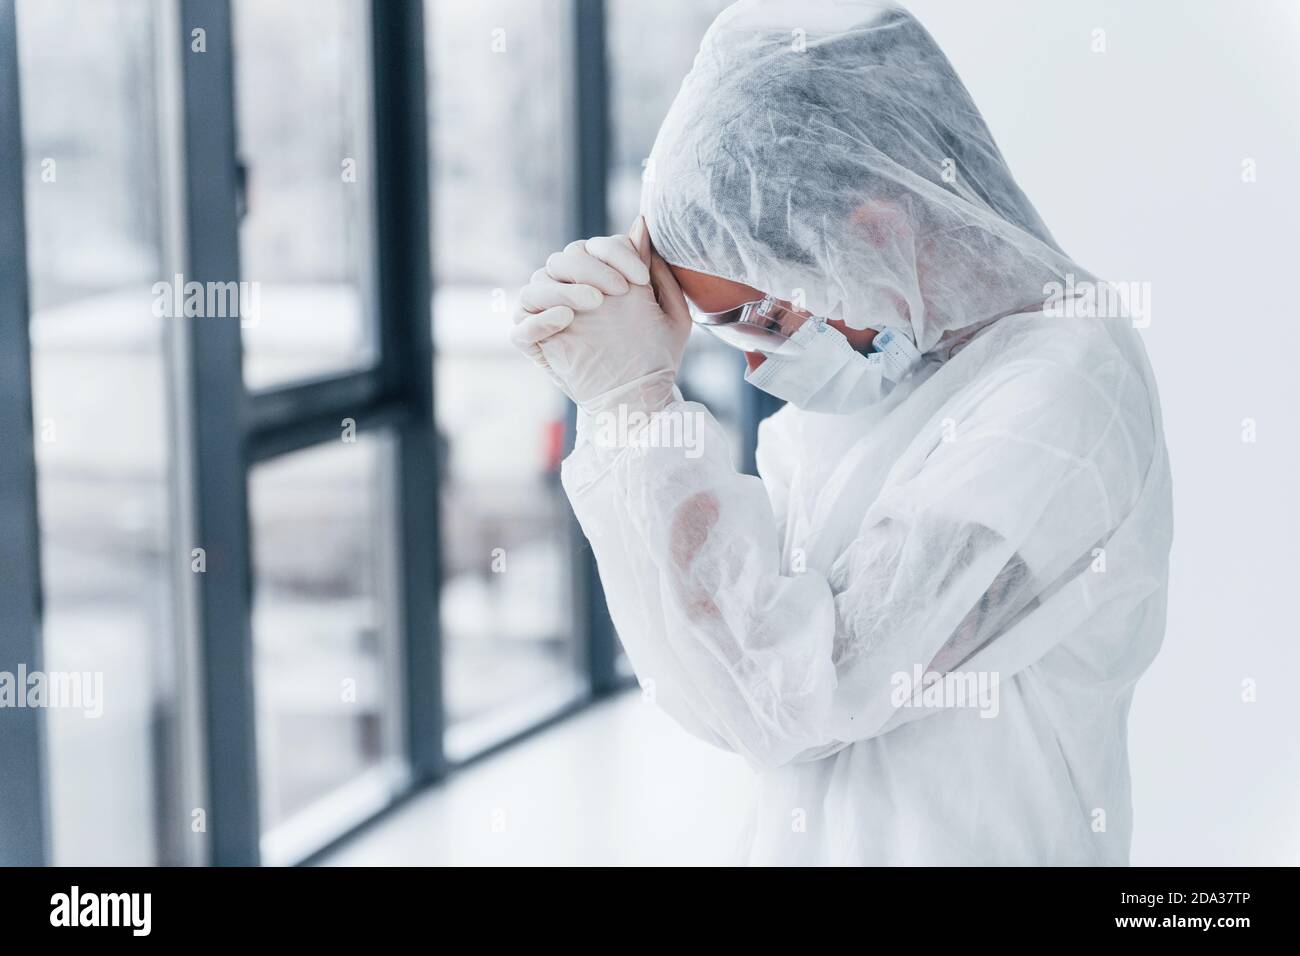 Feeling bad, tired and depressed. Portrait of female doctor scientist in lab coat, defensive eyewear and mask Stock Photo